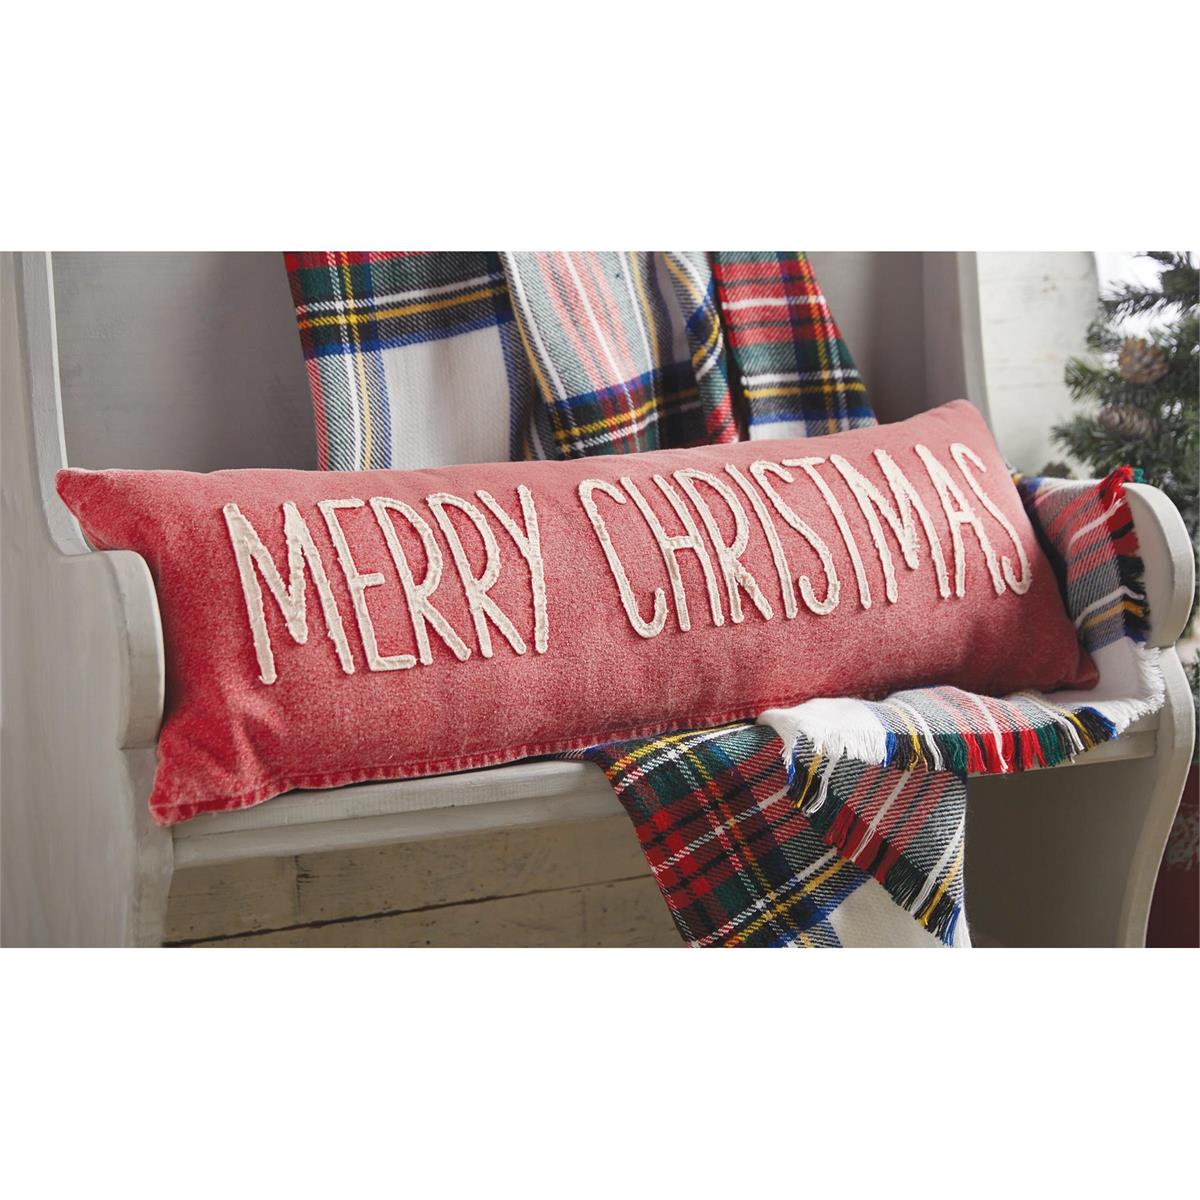 Mud Pie Merry Christmas Washed Canvas Pillow